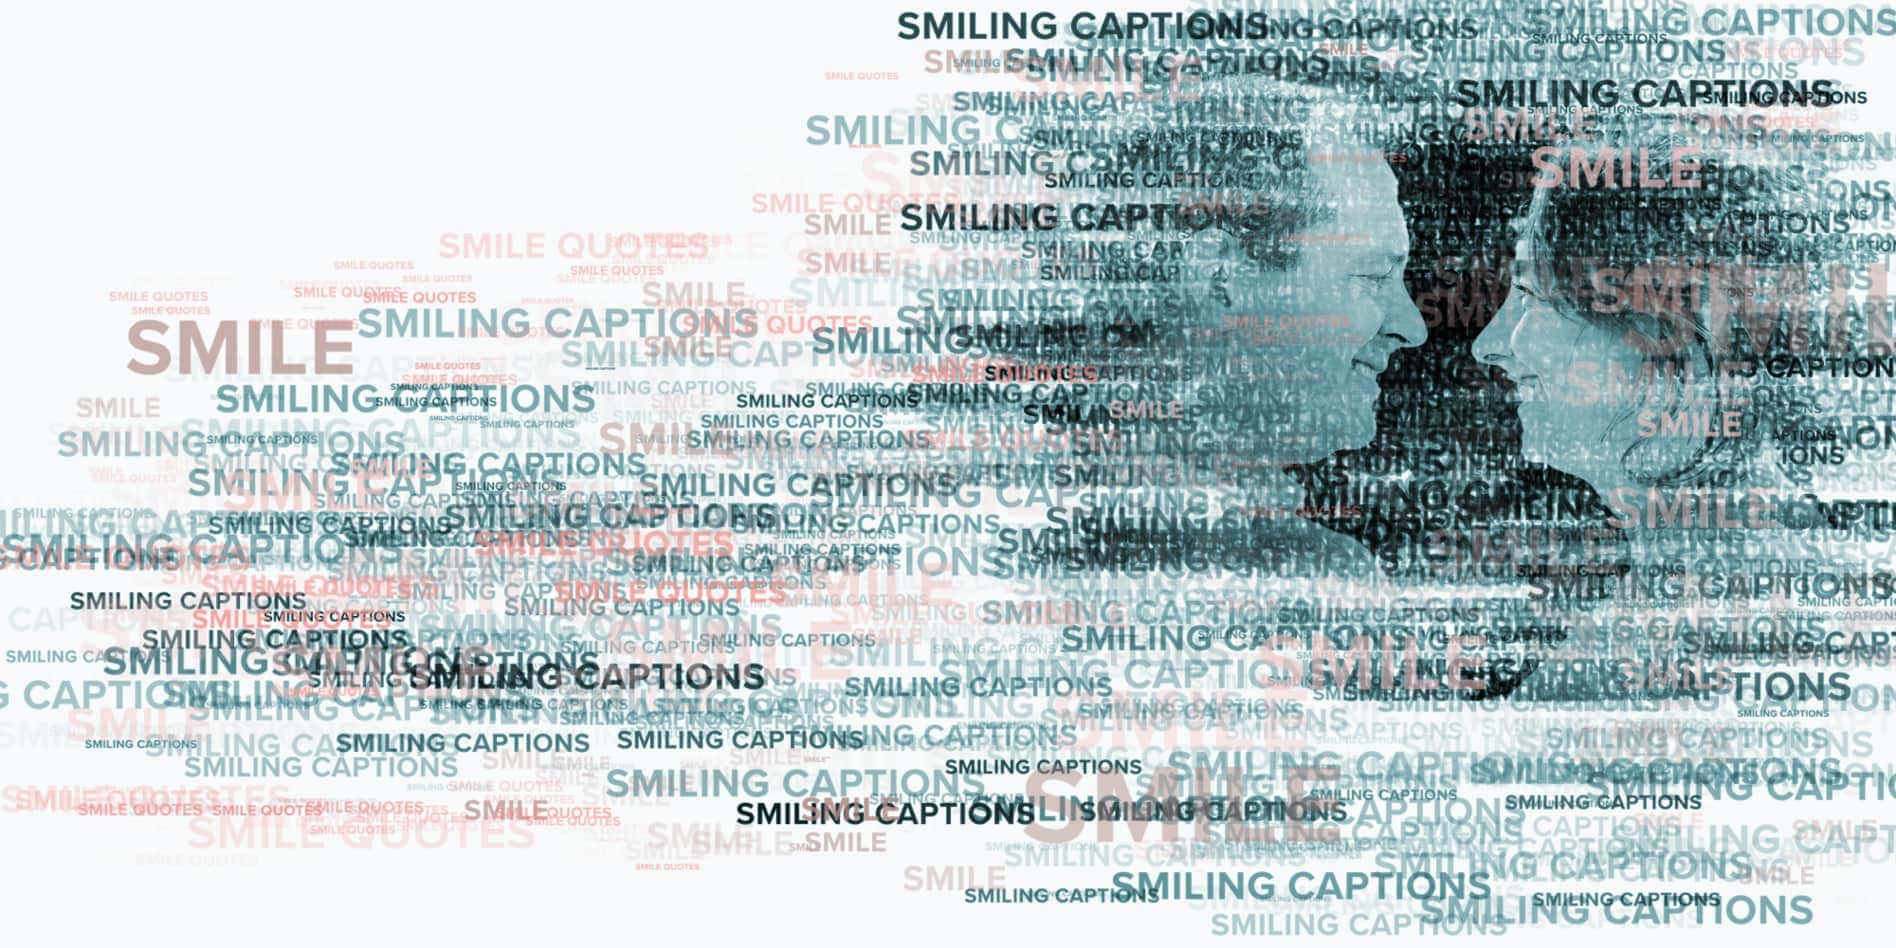 Smiling captions header photo with smile words over the image f two people smiling